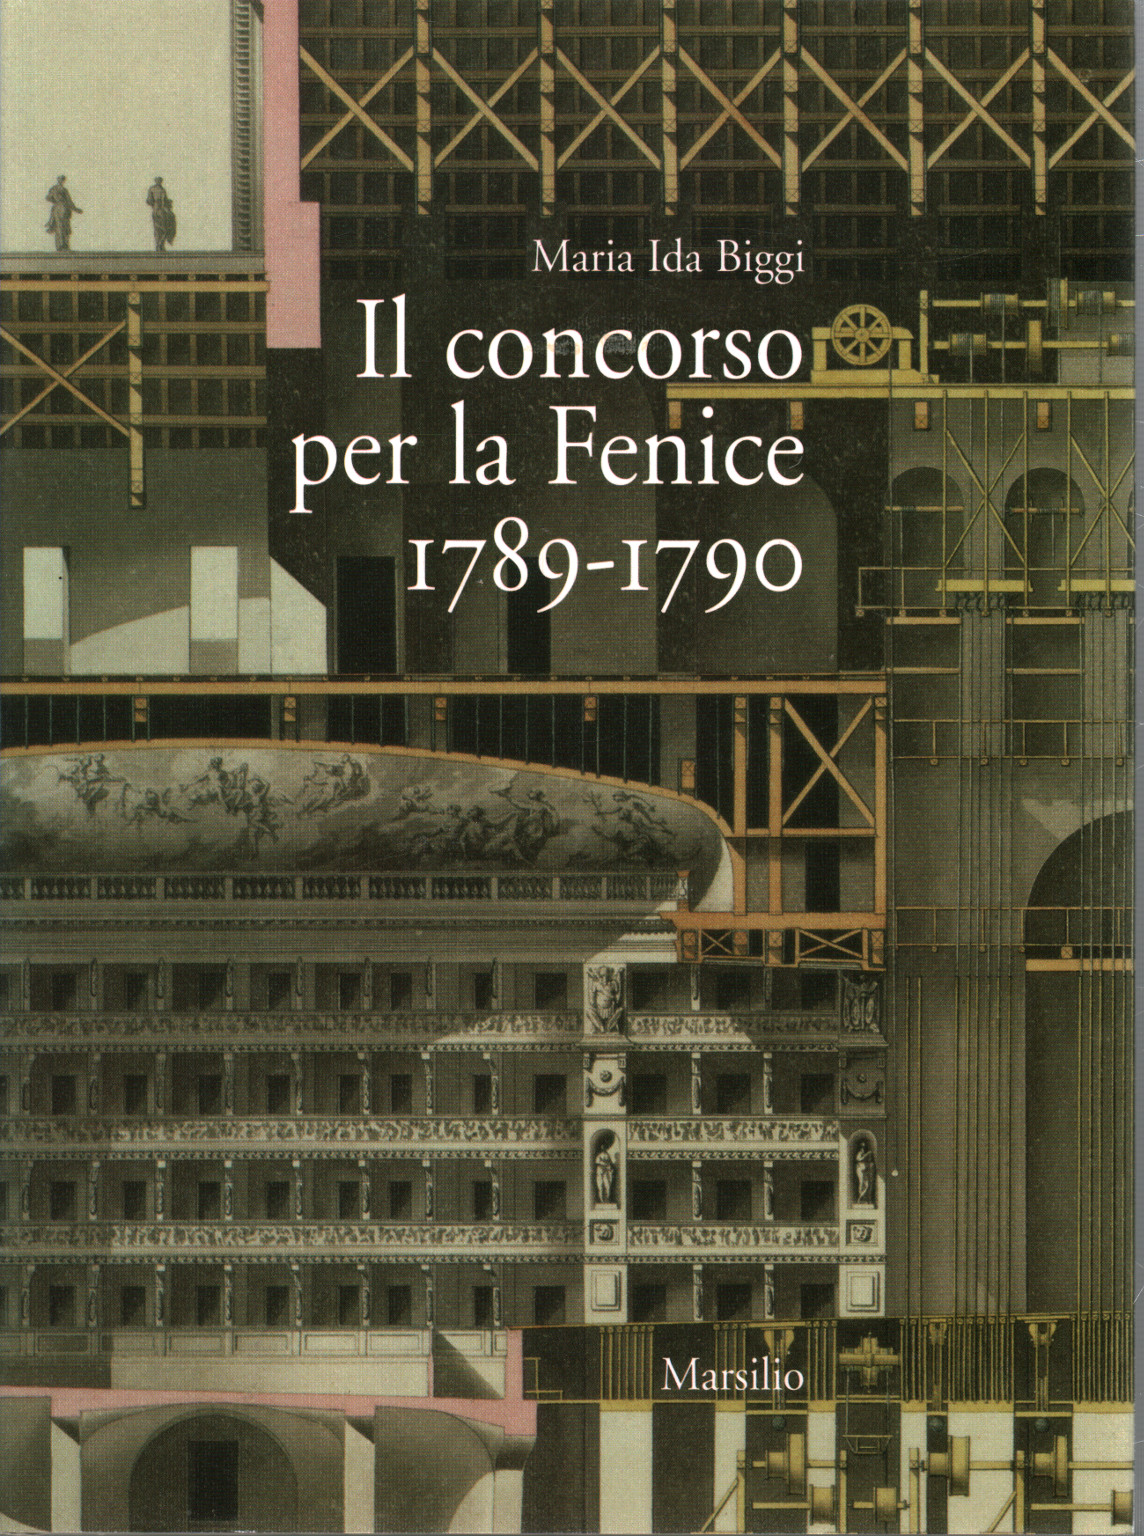 The competition for the Fenice 1789-1790, s.a.